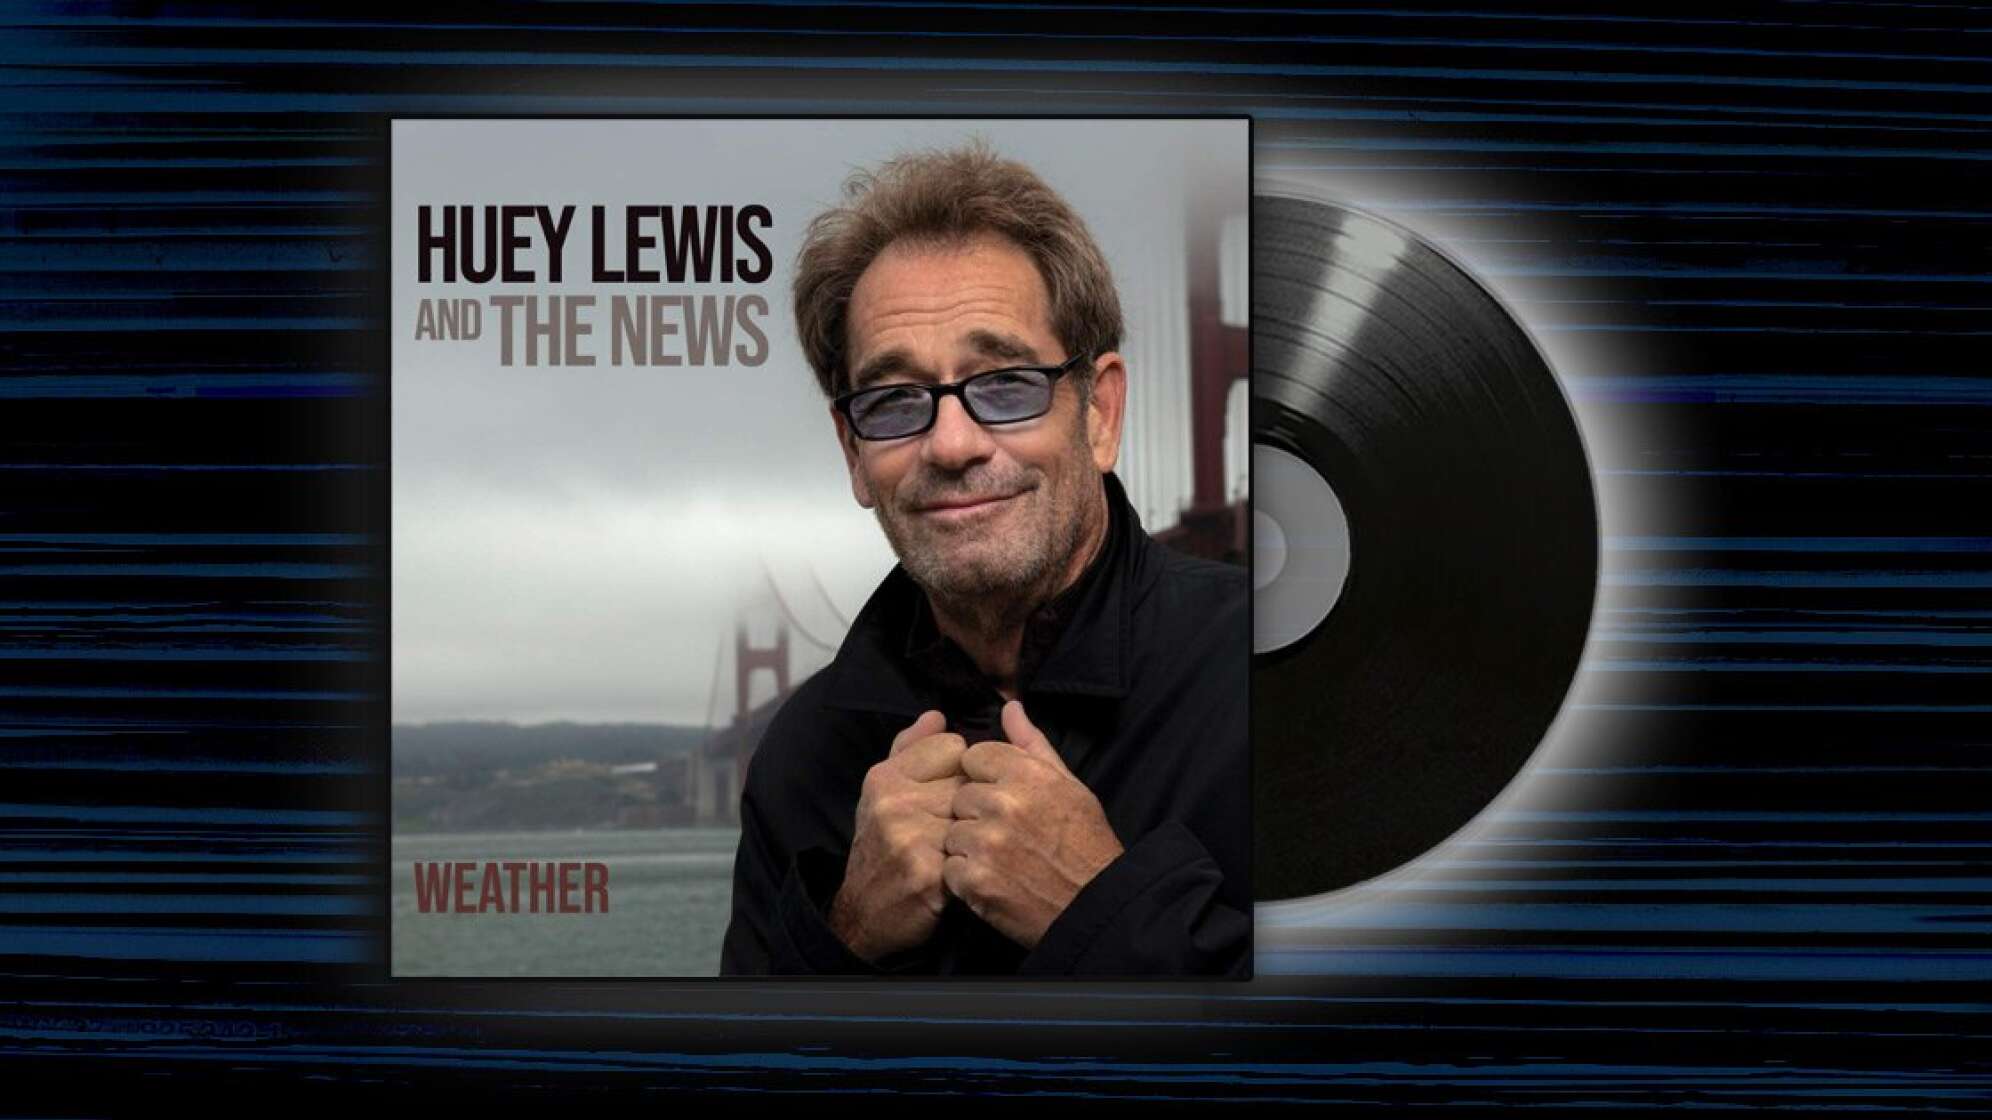 Album-Cover: Huey Lewis and the News - Weather